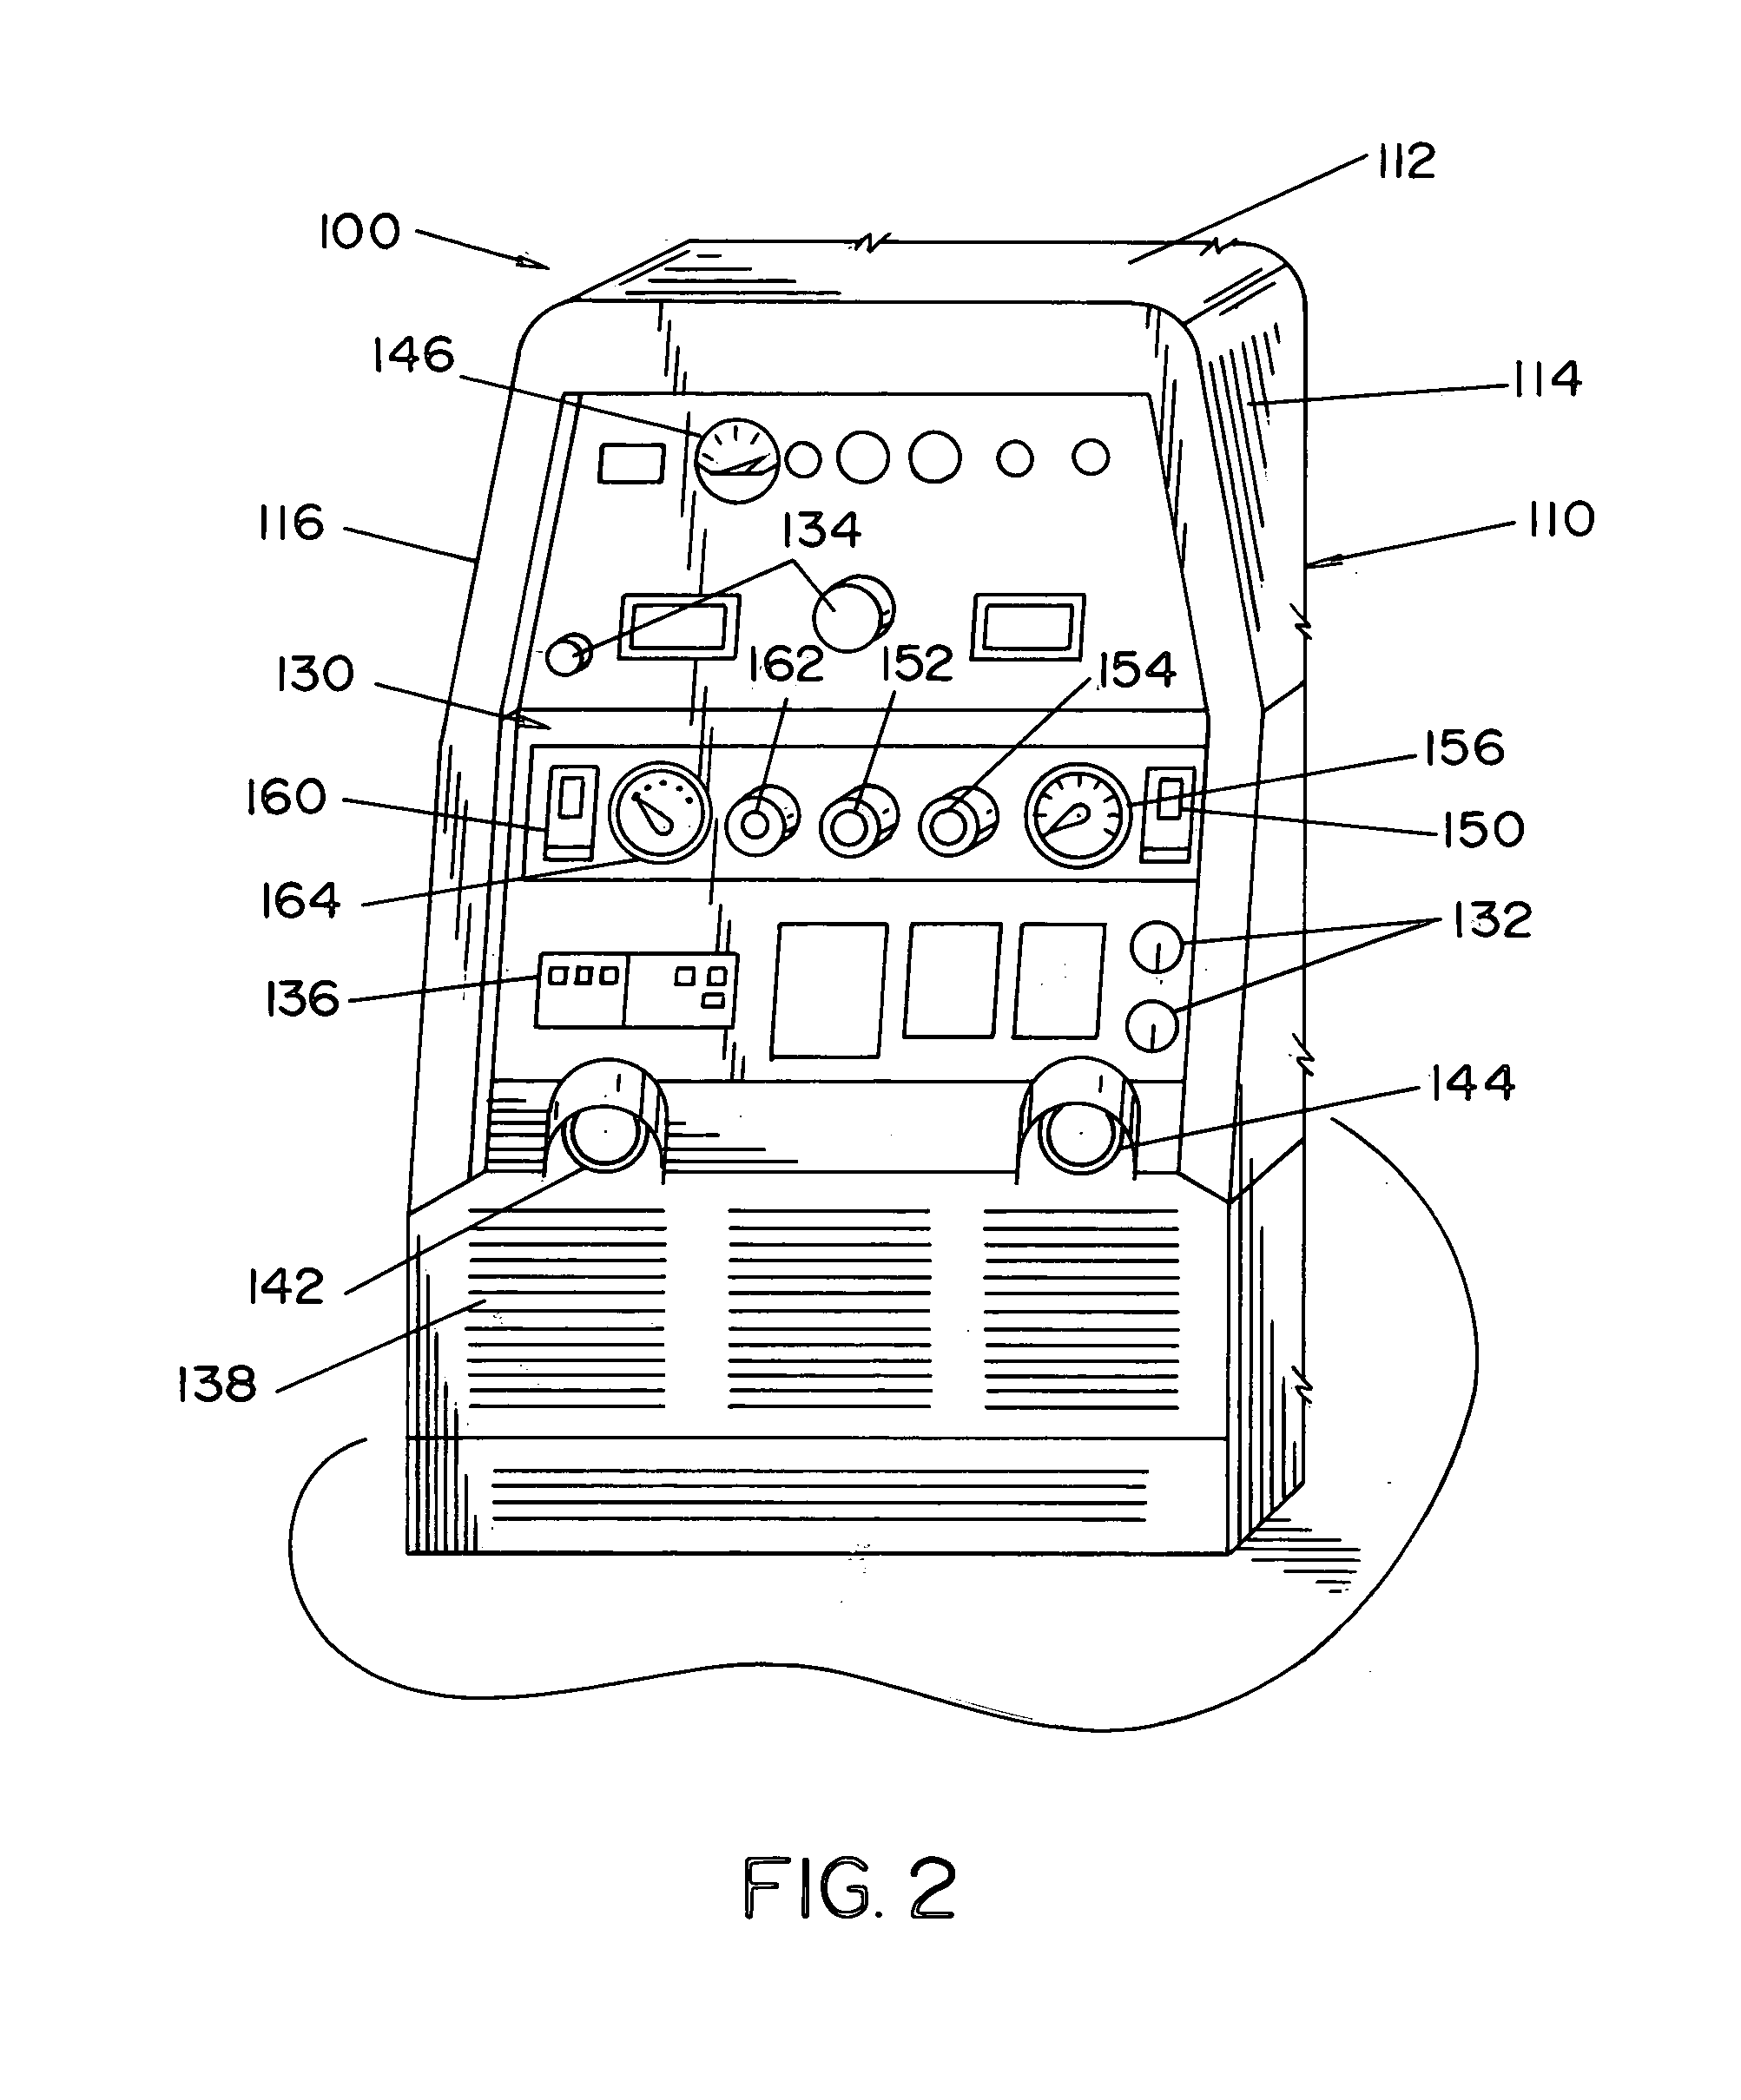 Integrated engine welder and hydraulic pump